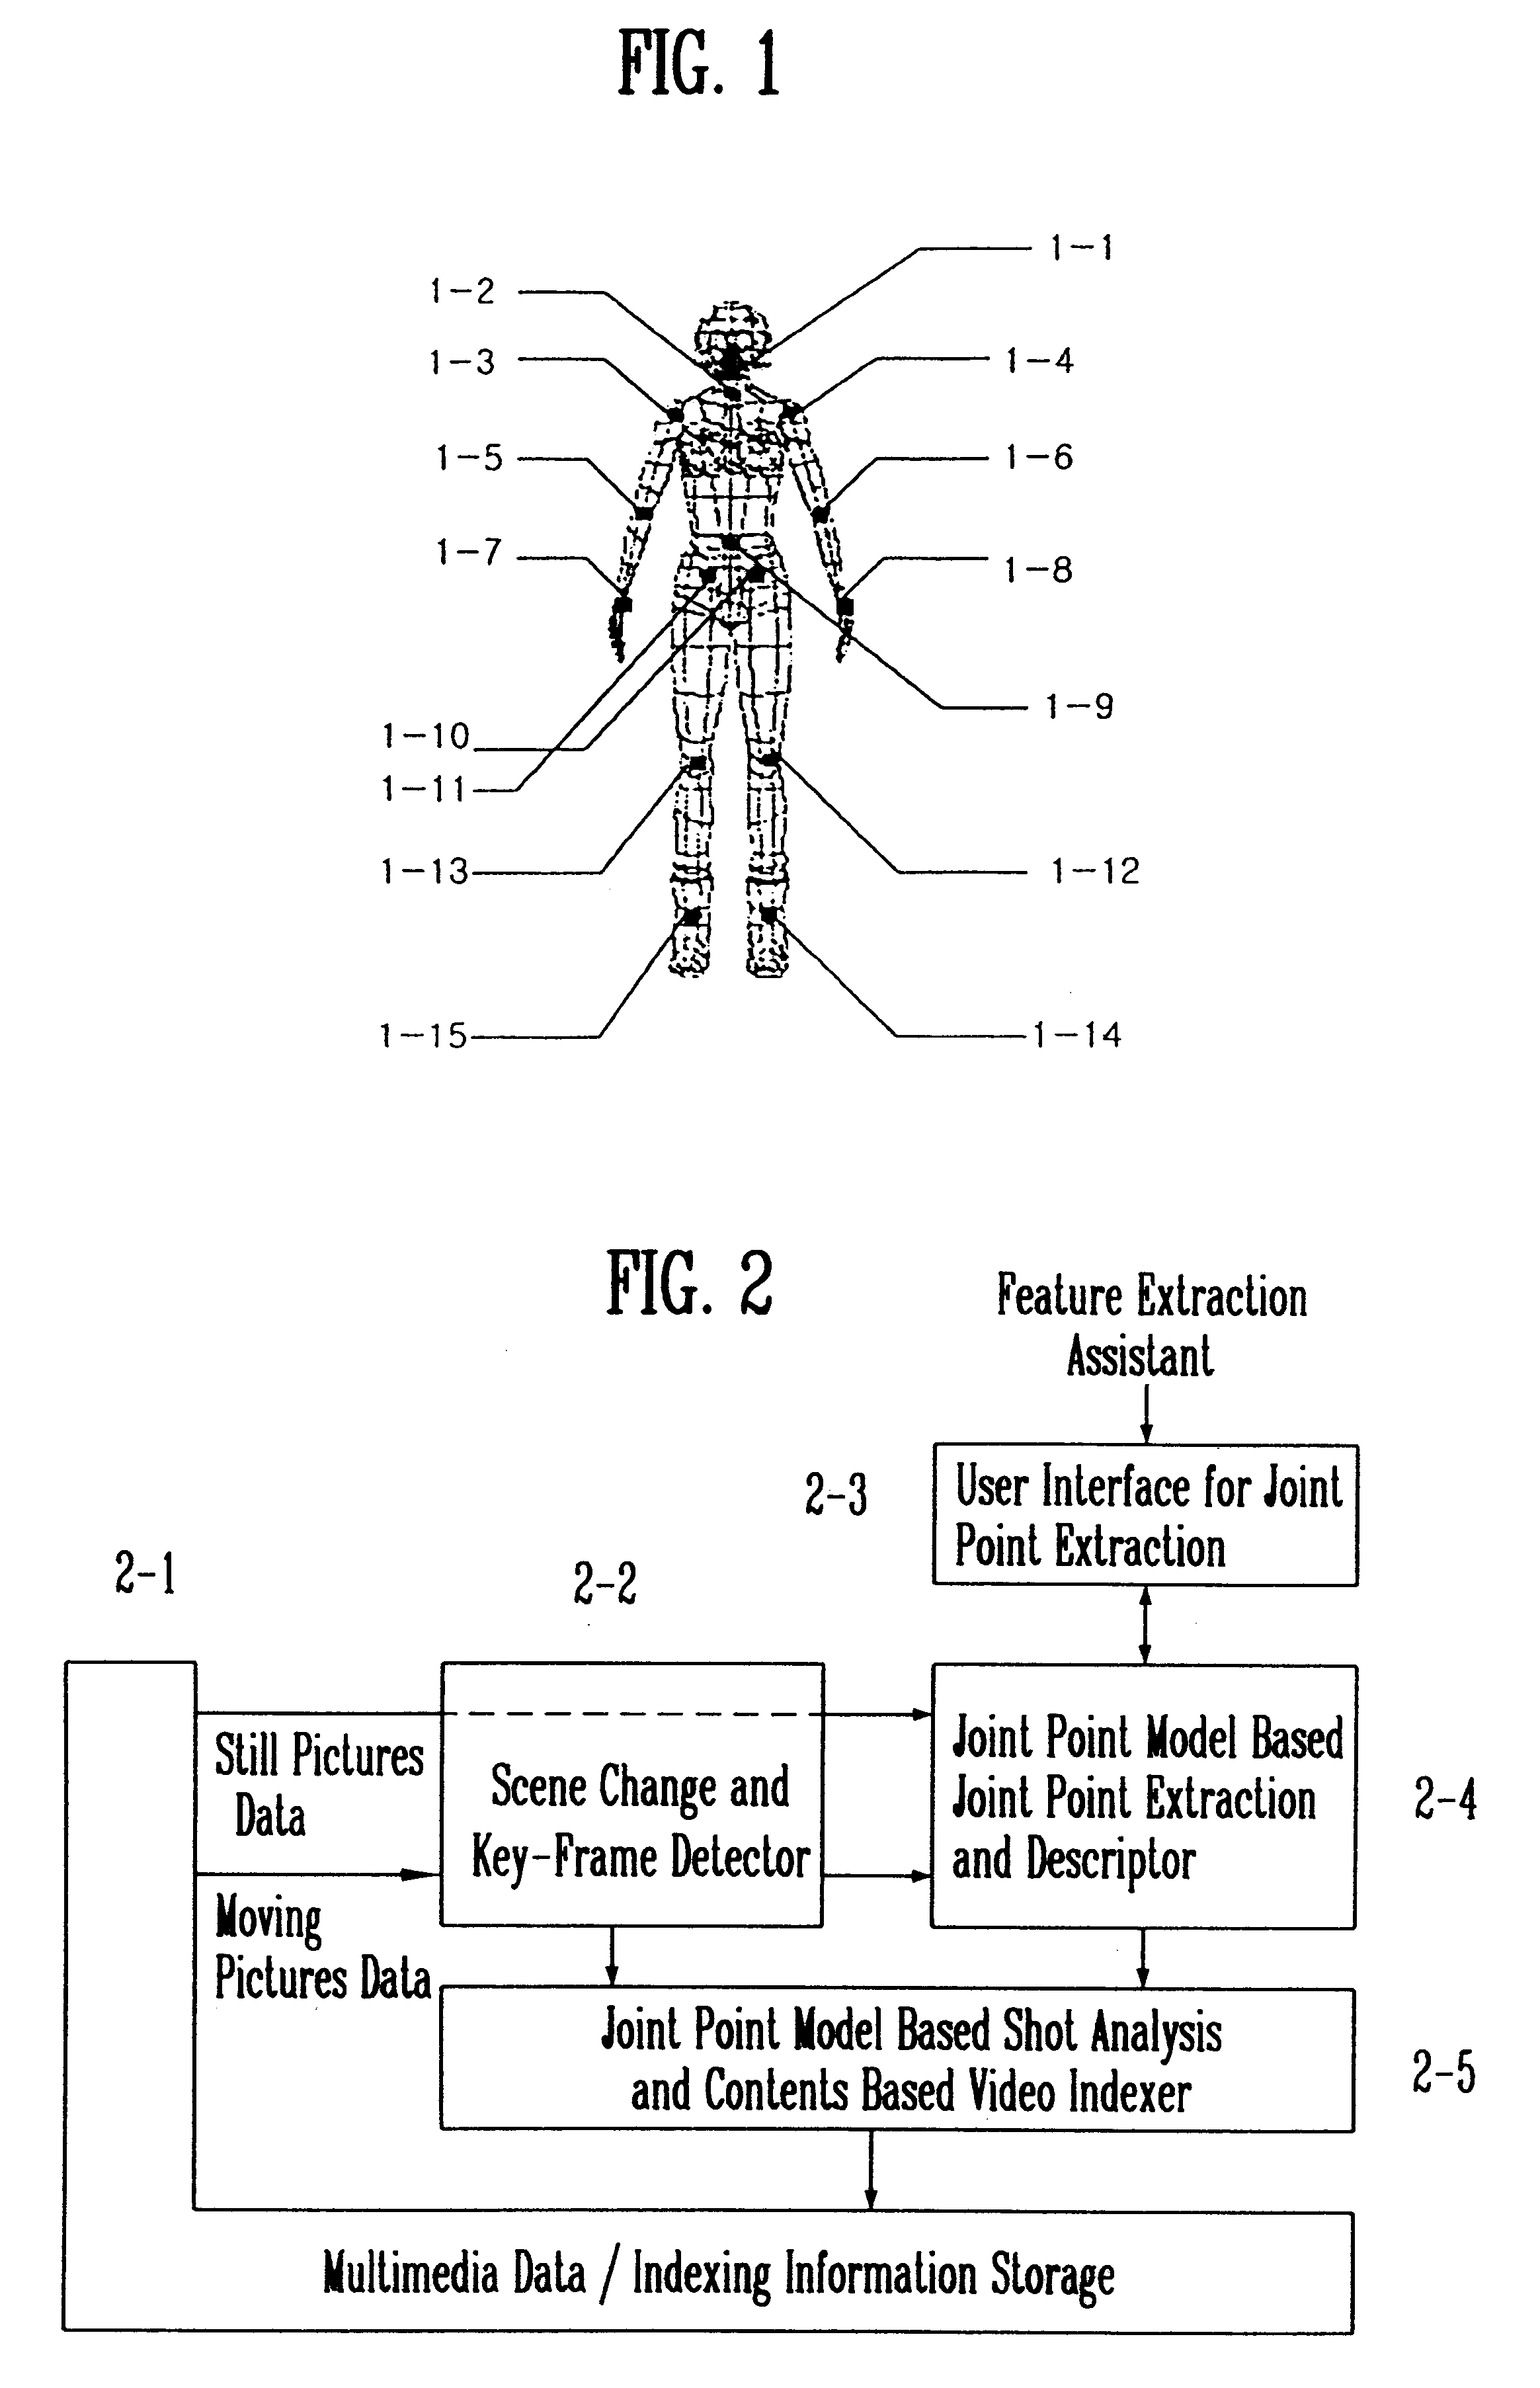 Method of retrieving moving pictures using joint points based on pose information